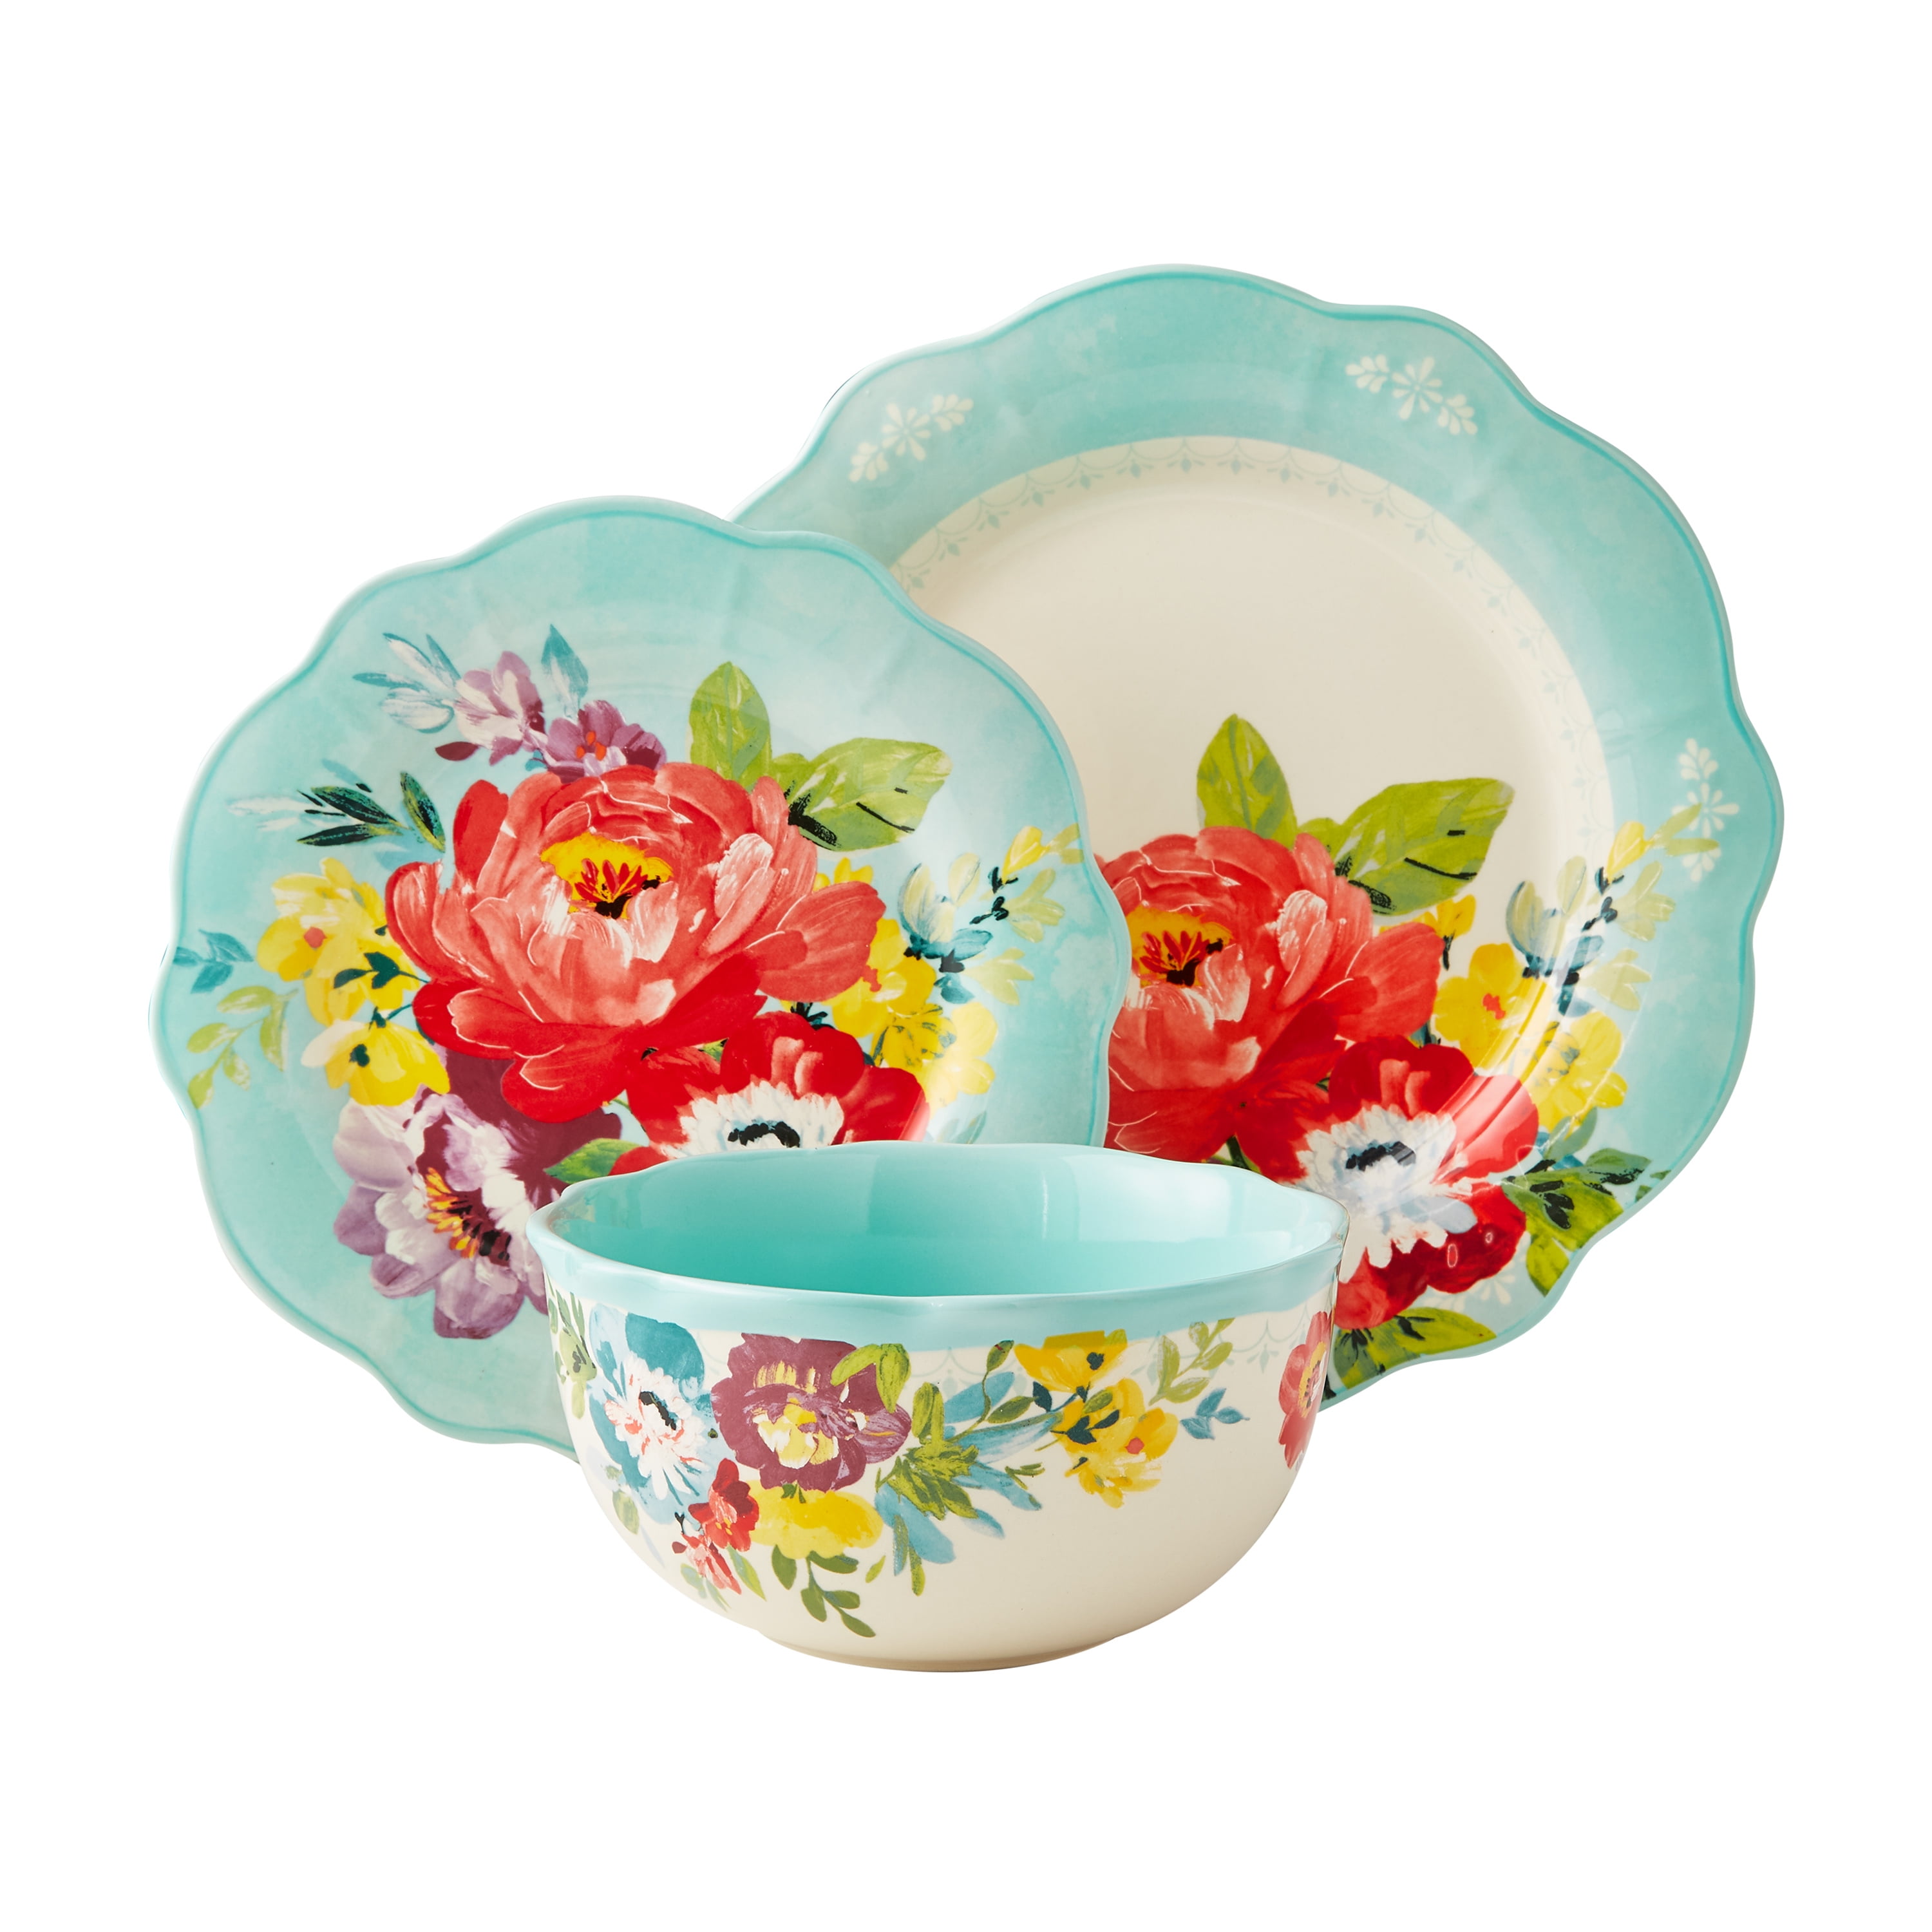 The Pioneer Woman Round Ceramic Cow Bake & Storage Nesting Bowls Set - Sweet Romance Blossoms - 6 Pieces